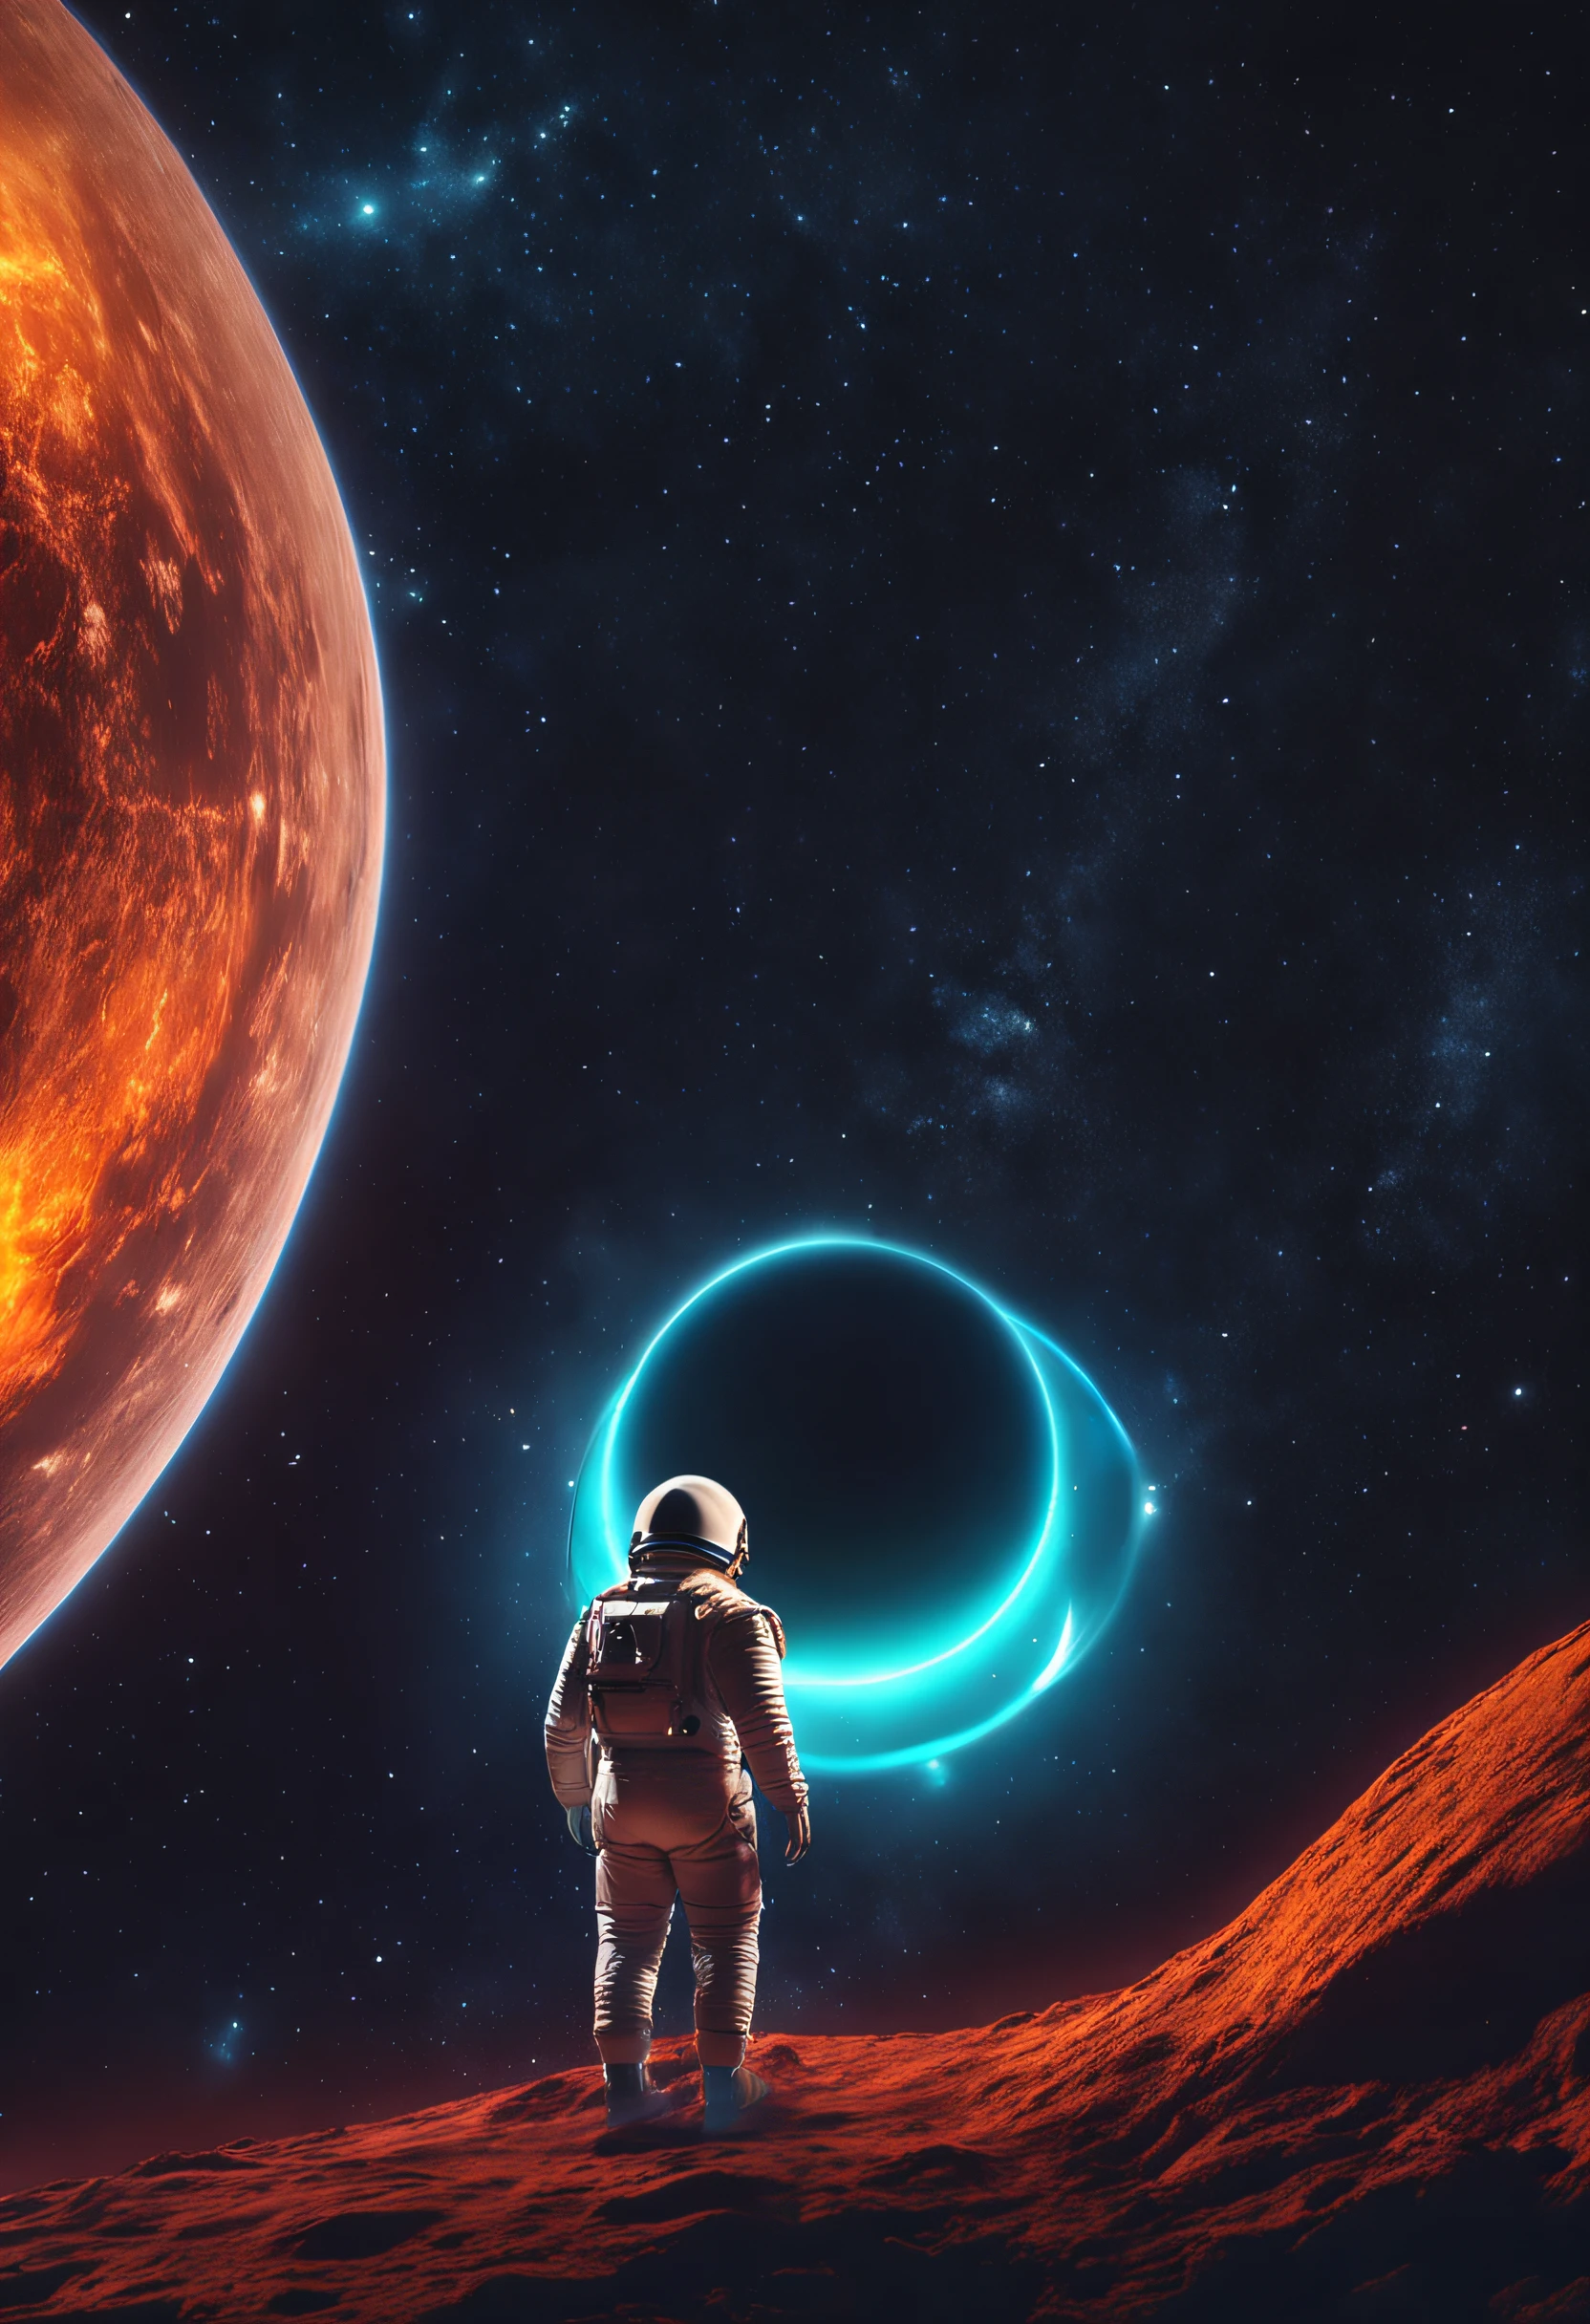 An animation of an astronaut approaching a black hole 8k cinematico e realista